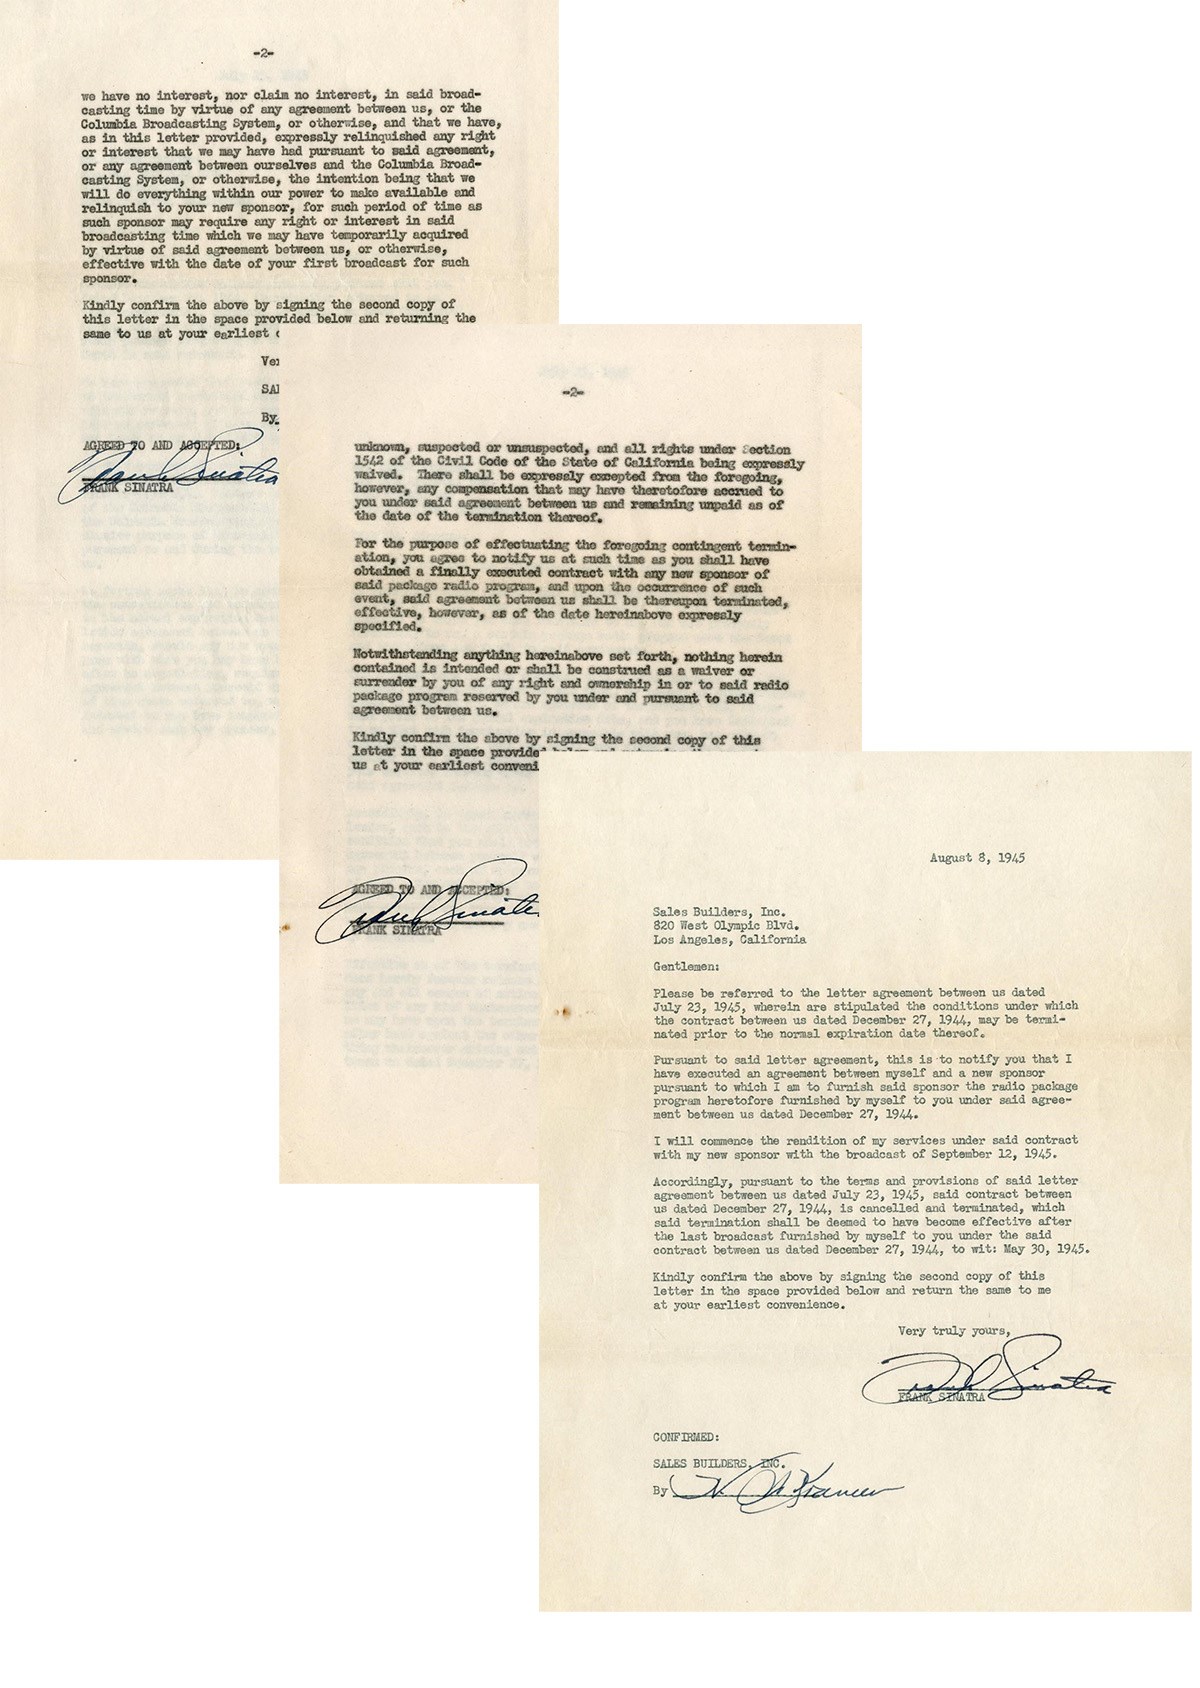 - 1945 Frank Sinatra Signed Contracts for Radio Show (PSA)